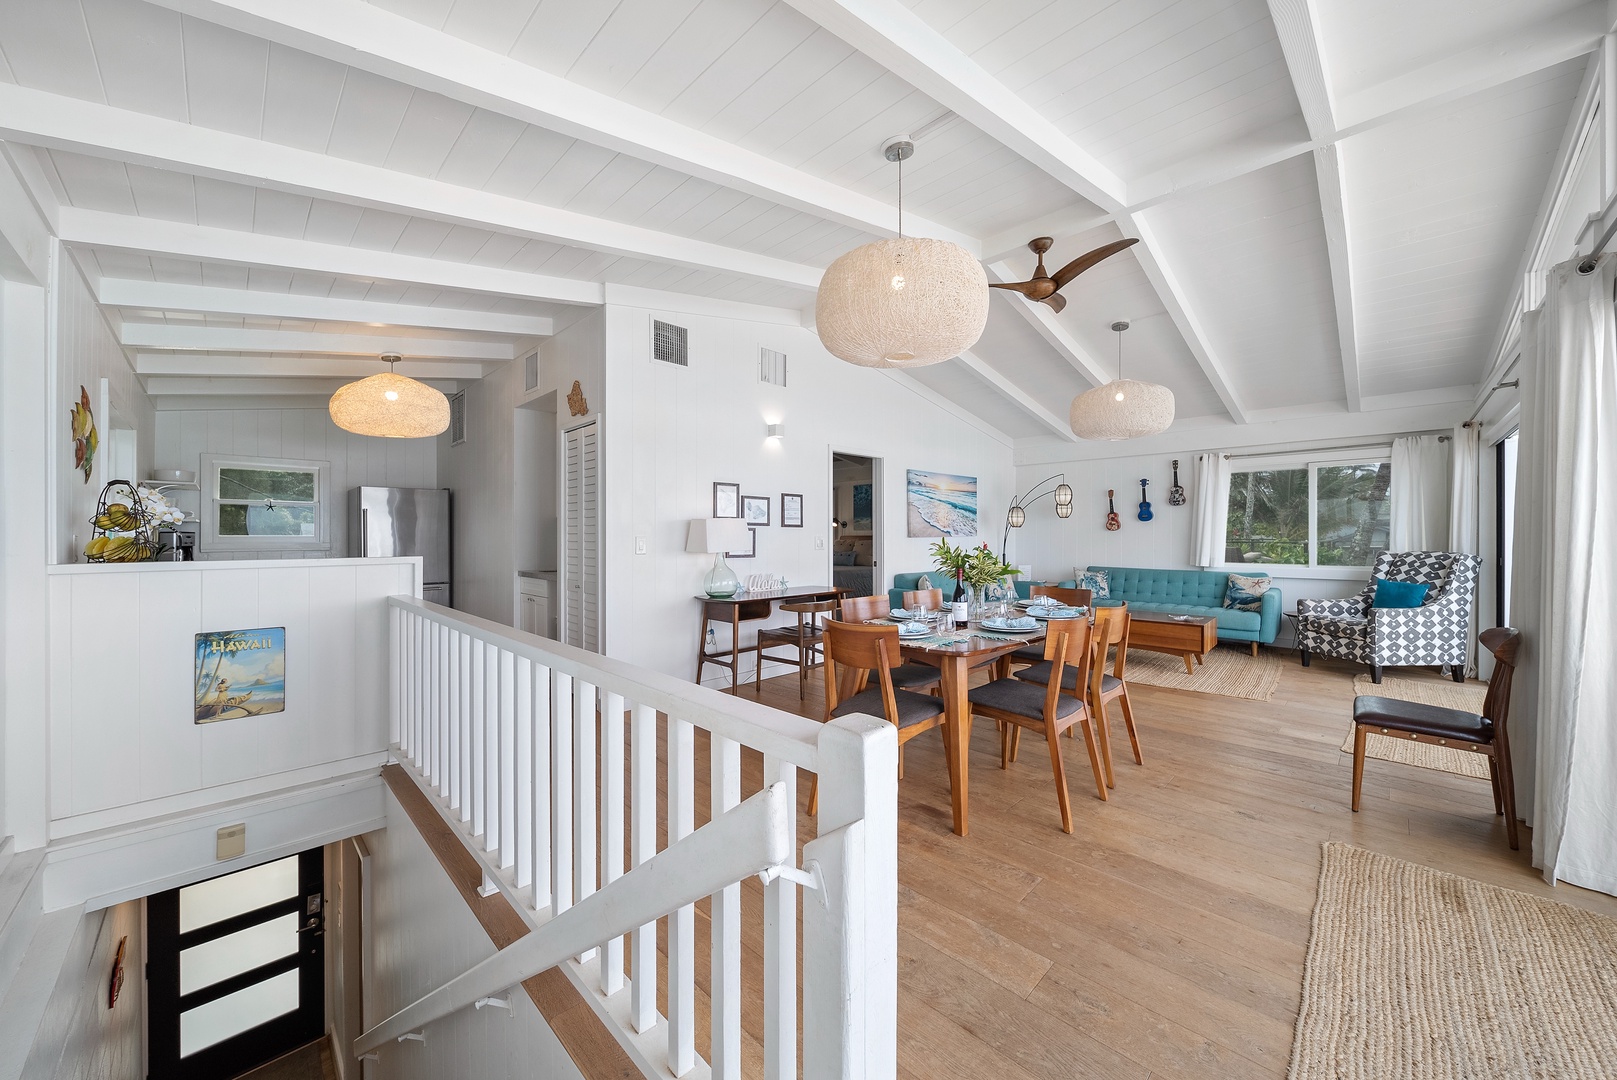 Haleiwa Vacation Rentals, Surfer's Paradise - The kitchen, dining area, living room, and primary bedroom are all on the upper level